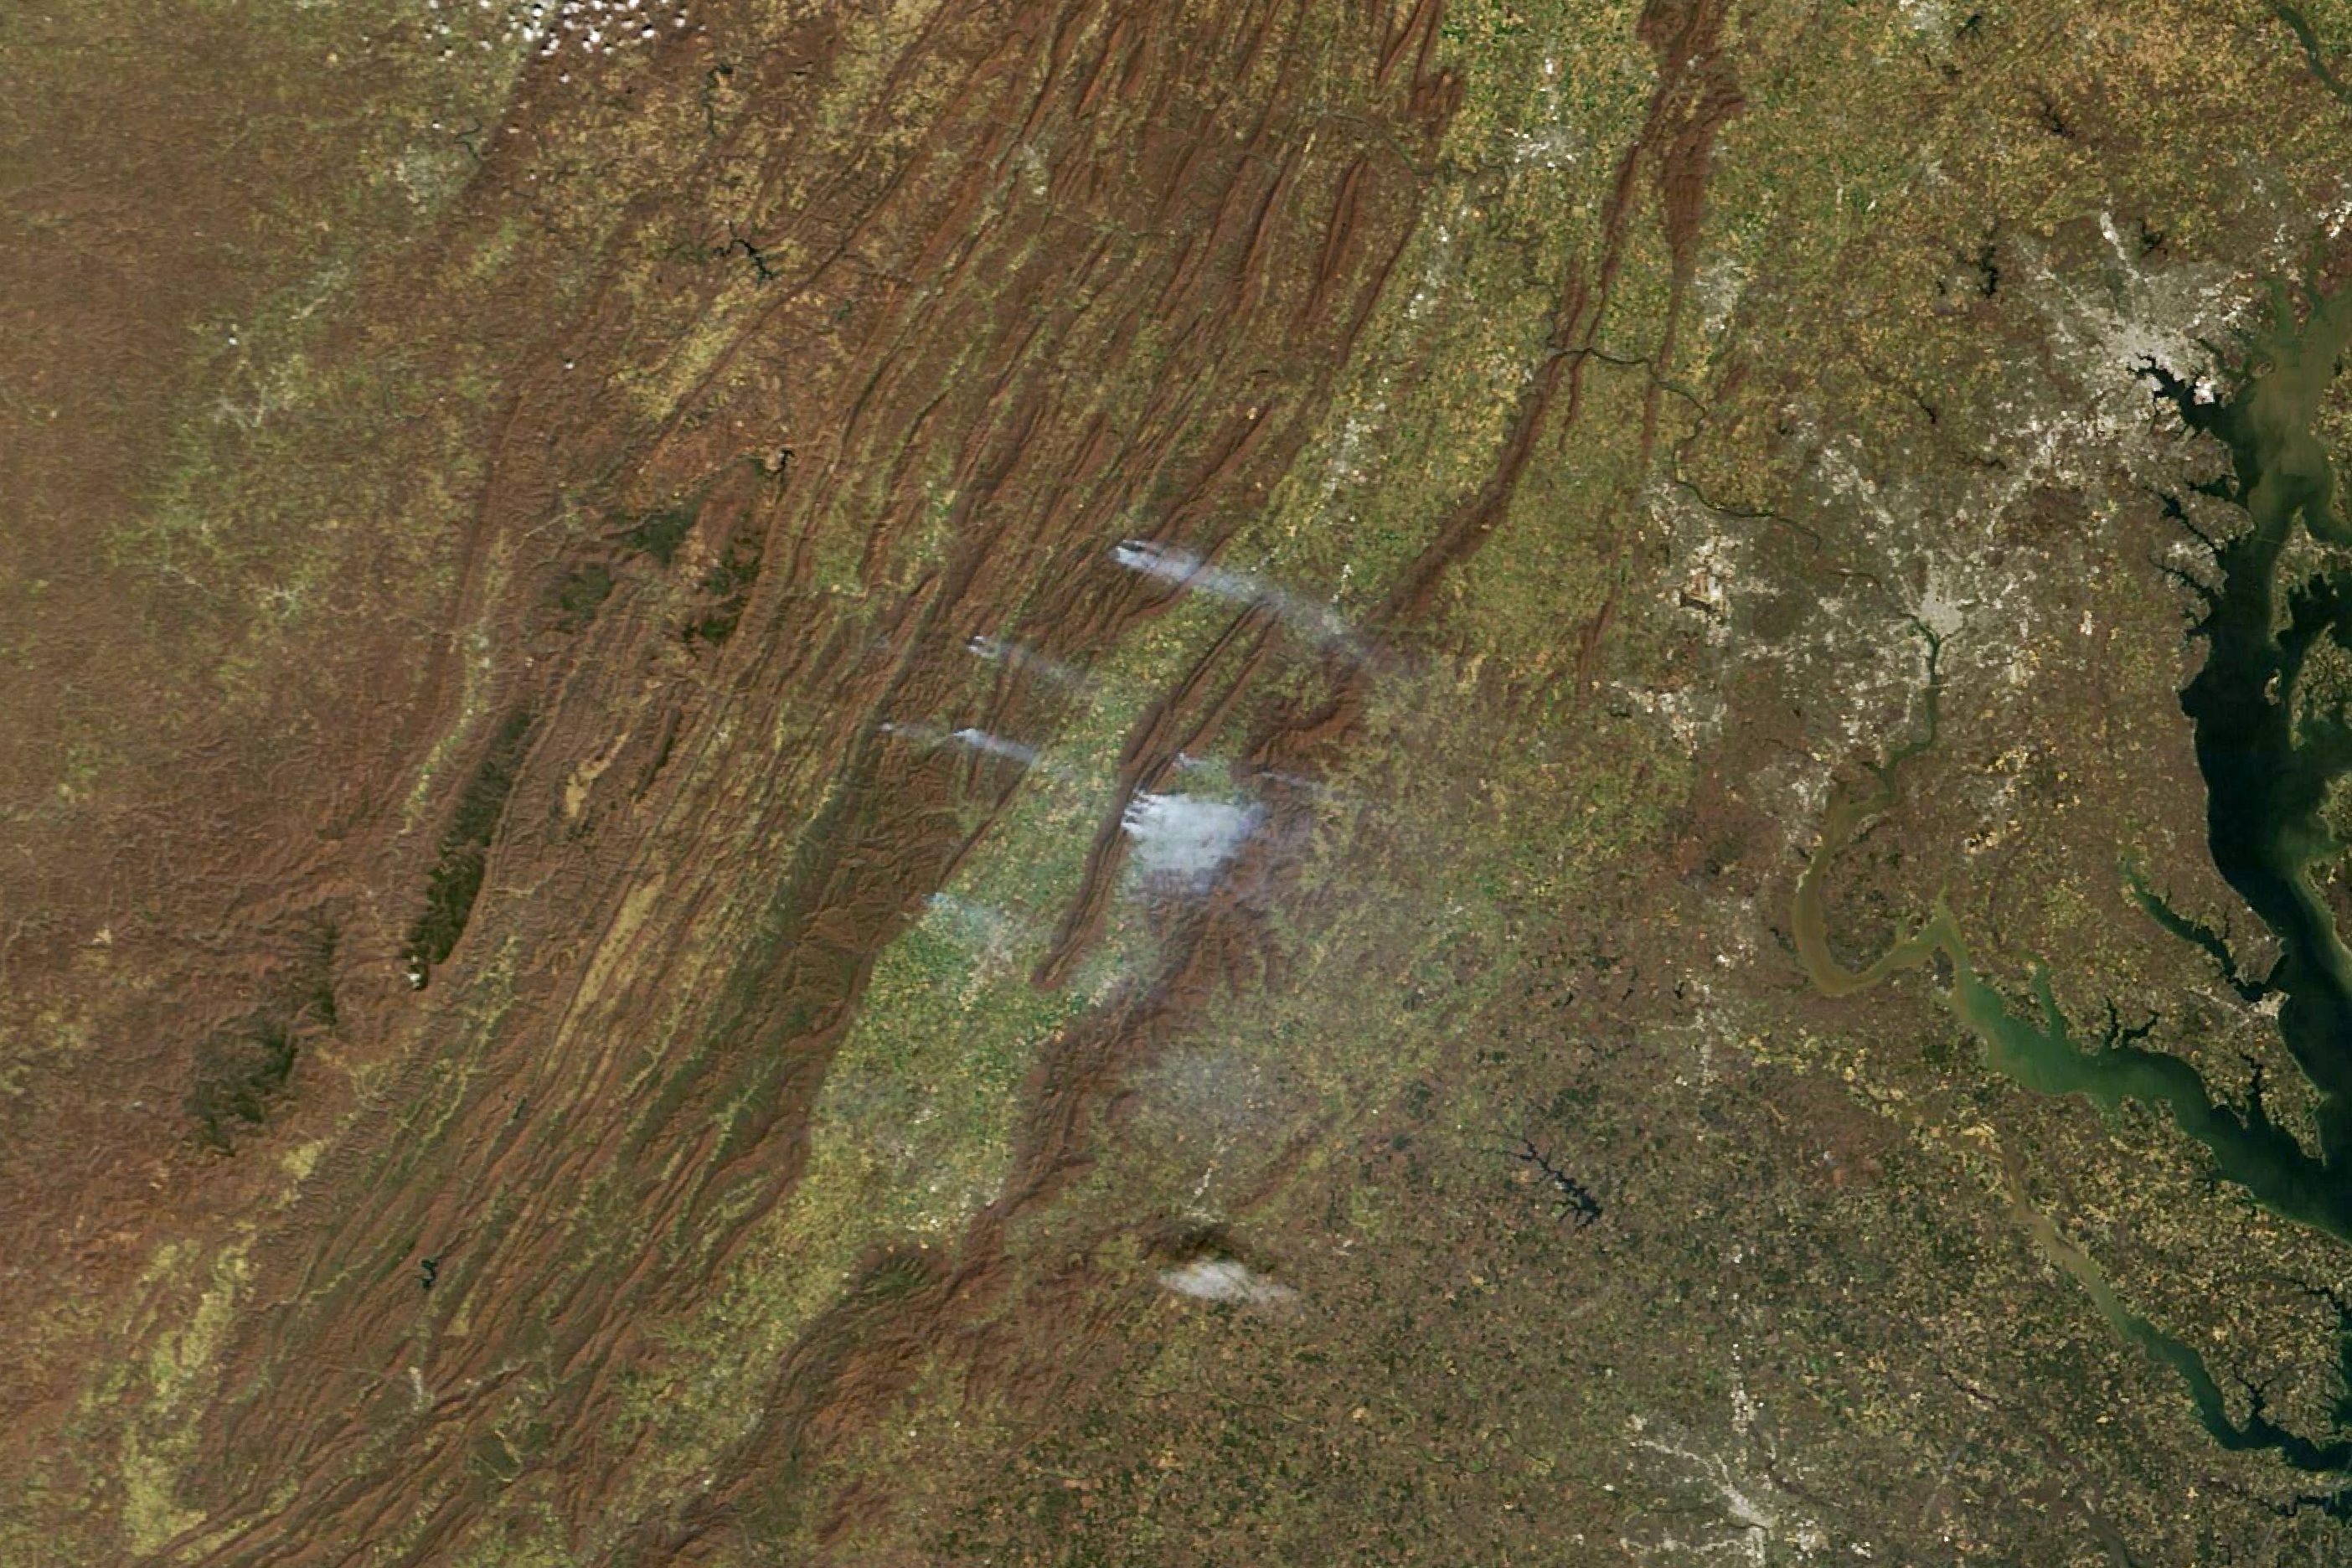 On March 21, the Virginia Department of Forestry said that firefighters had responded to more than 100 wildfires in the previous 48 hours. The fires had burned more than 7,500 acres (3,000 hectares). The MODIS (Moderate Resolution Imaging Spectroradiometer) sensor on NASA’s Terra satellite captured this image of smoke streaming from the fires on that day.